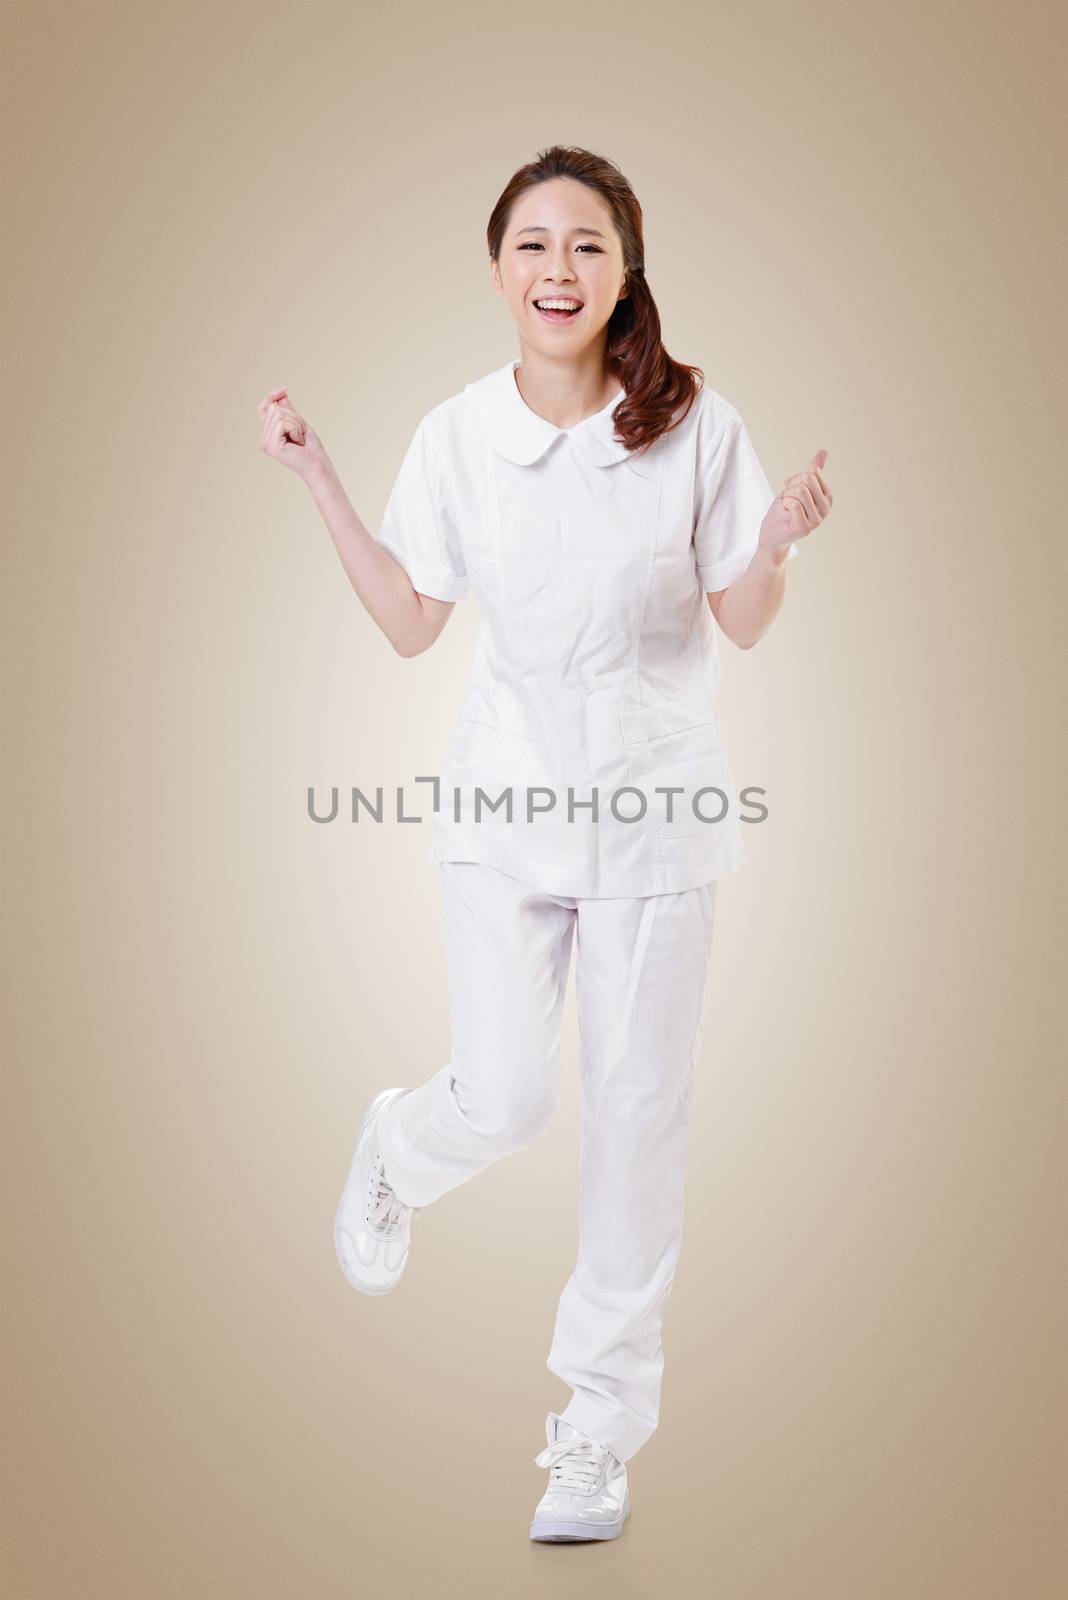 Cheerful Asian nurse, woman portrait isolated on white background.